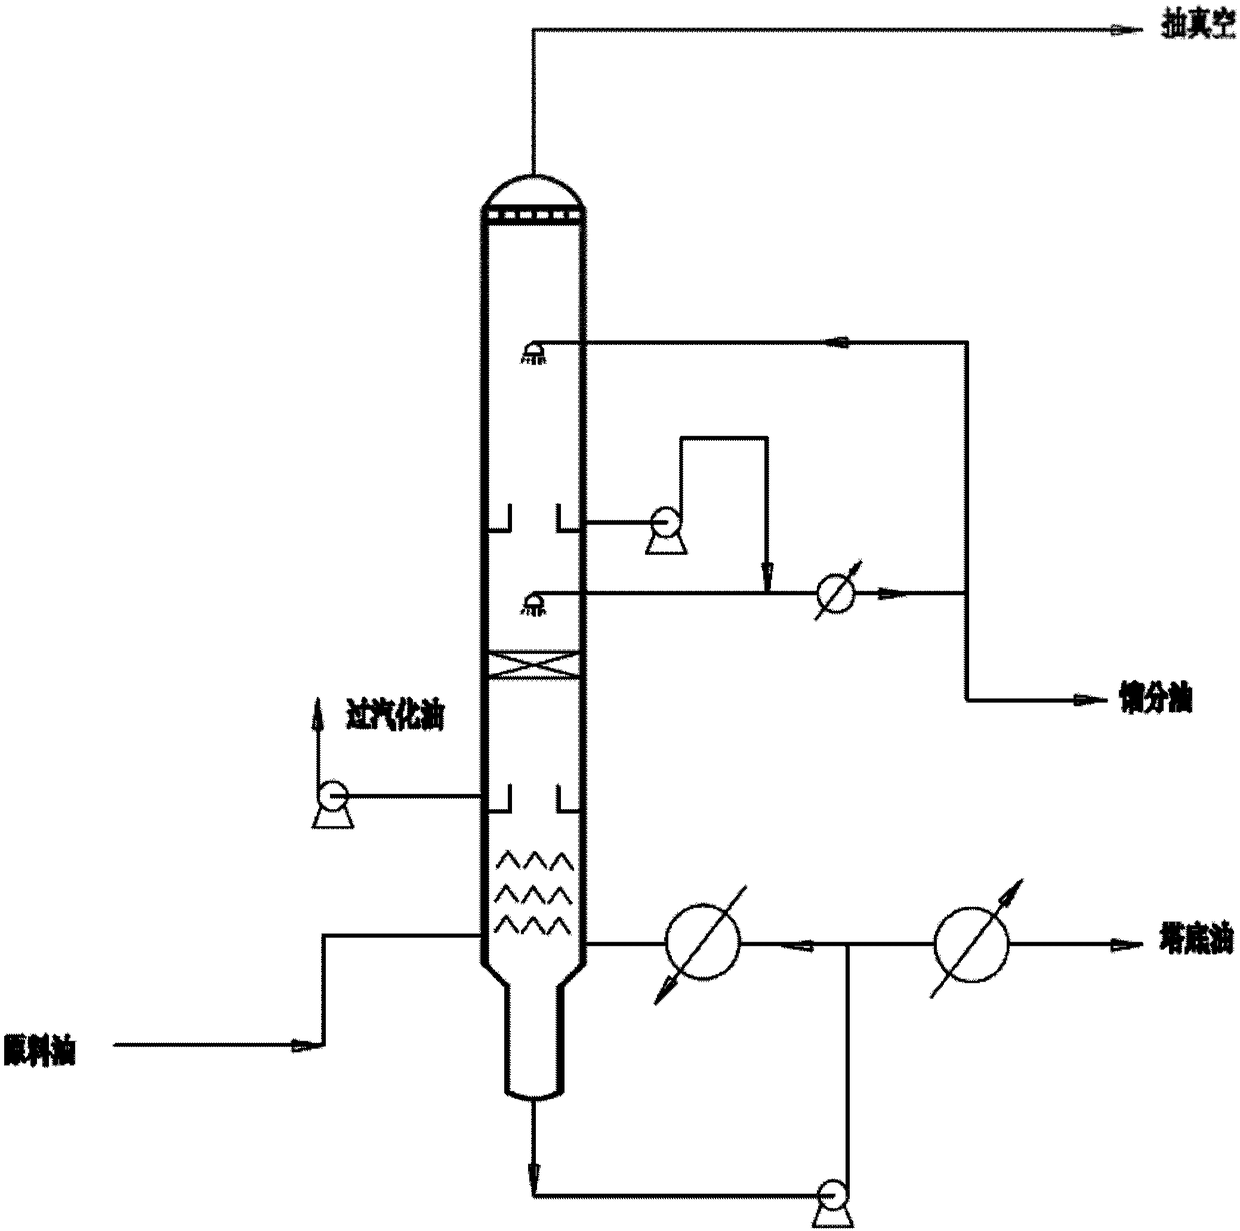 Reduced-pressure distillation equipment for pretreatment of waste lubricant oil